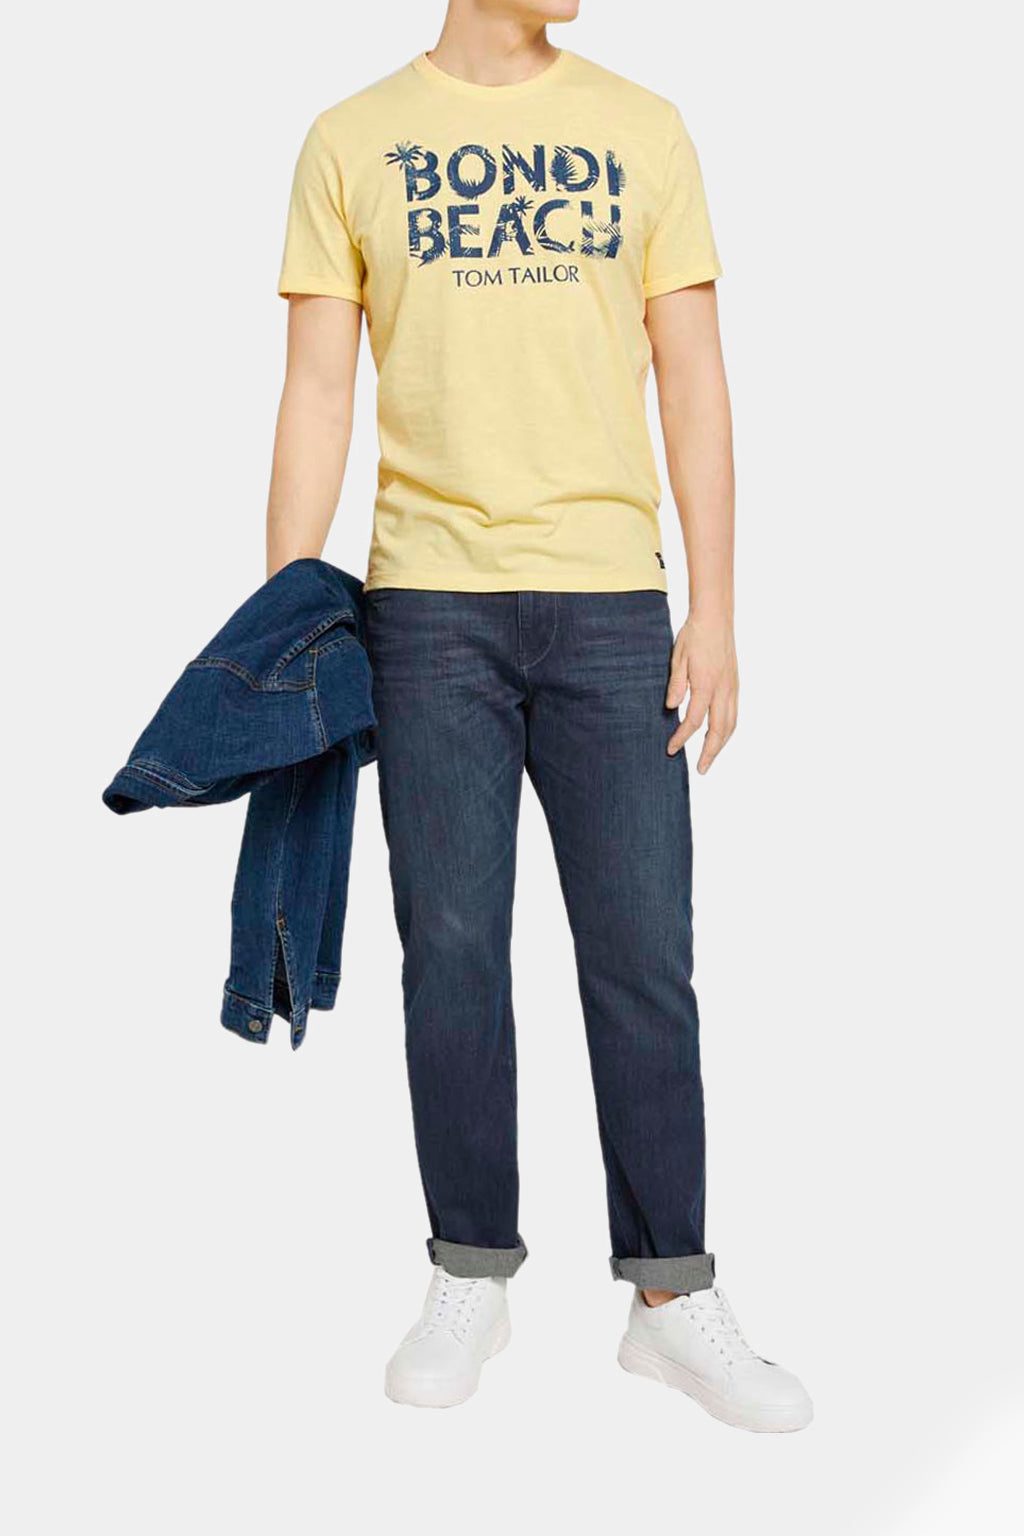 Tom Tailor - Printed T-Shirt With Organic Cotton